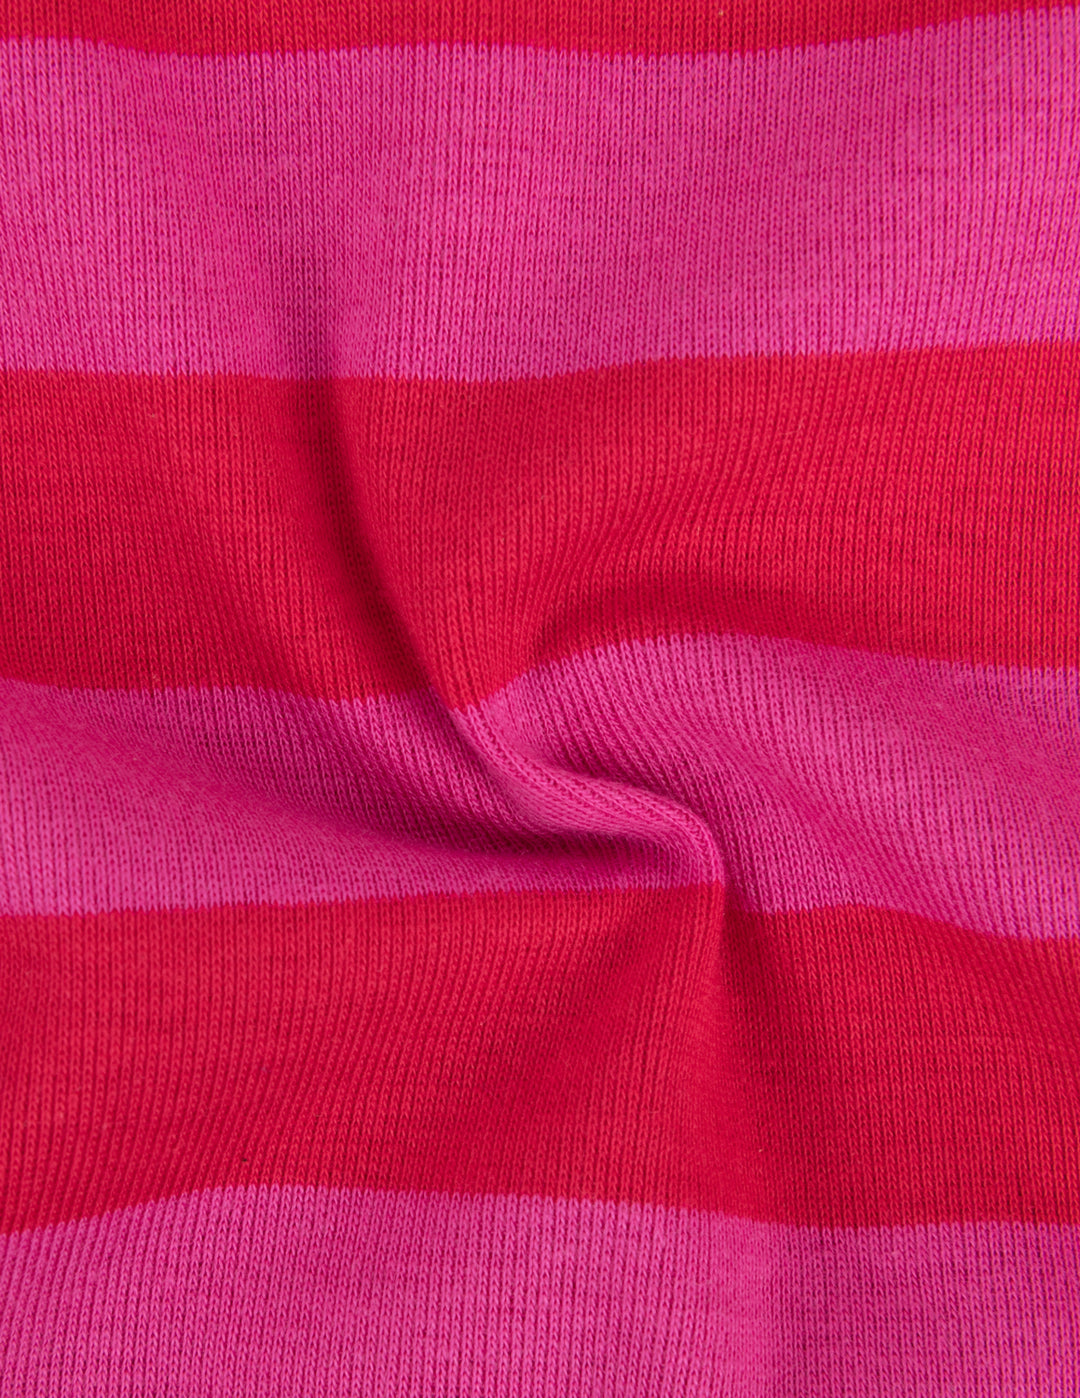 red pink stripes swatch